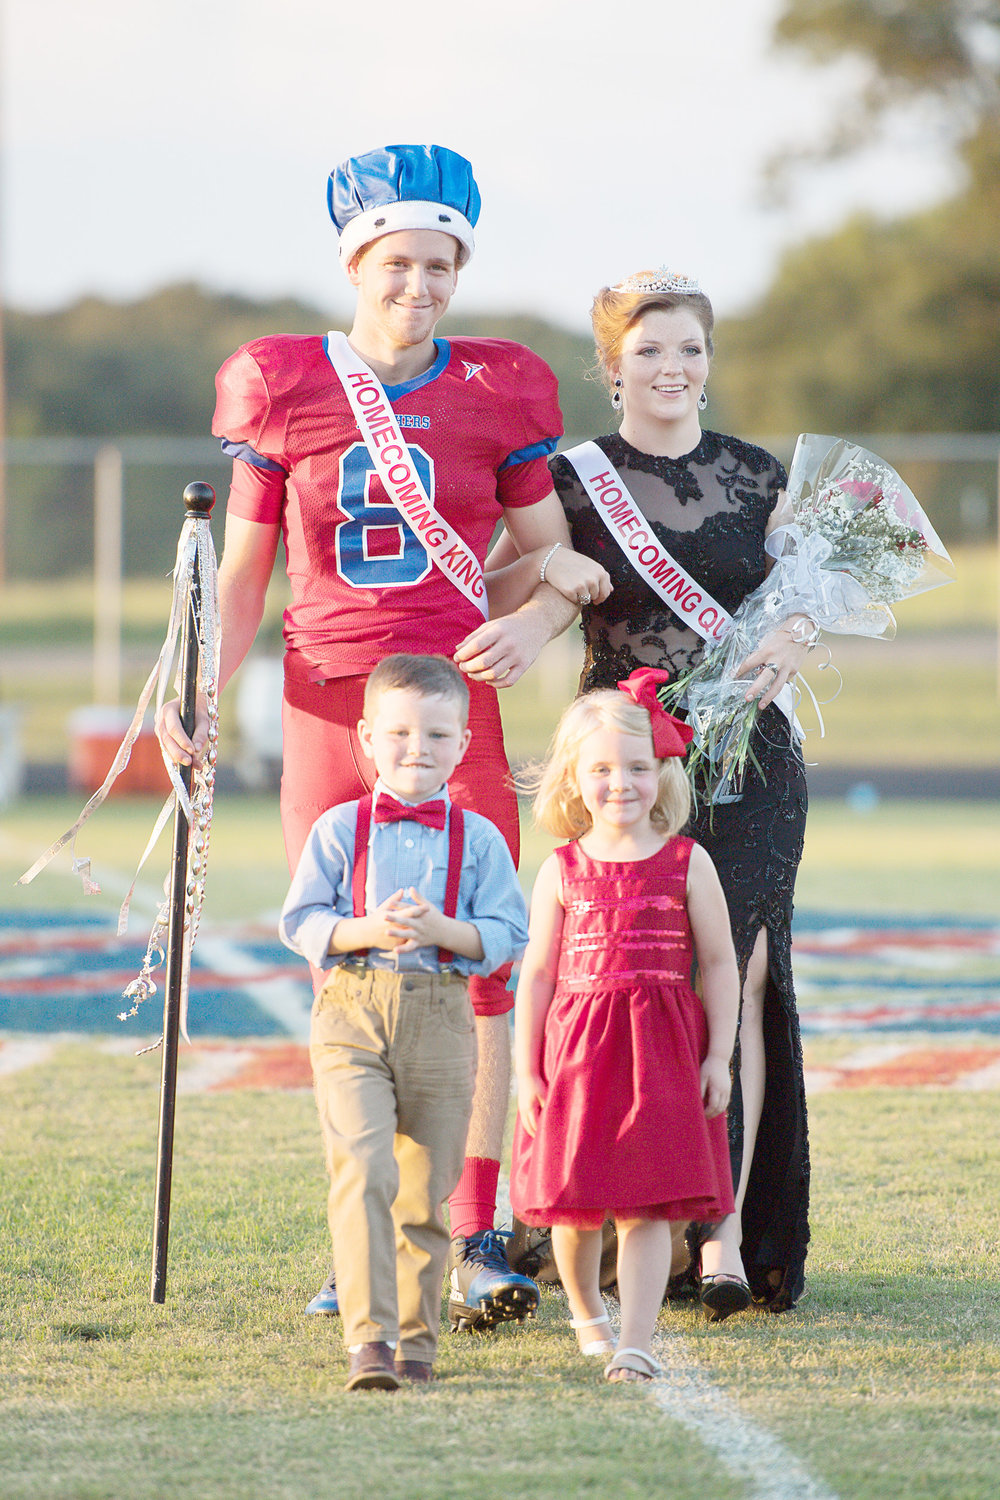 From left, Cody Frazier (8) and Reygan Arrington were selected as Alba-Golden Homecoming King and Queen. They are preceded by Cannon Mason and Katelyn Mize. (Photo courtesy of Chad Parrish)